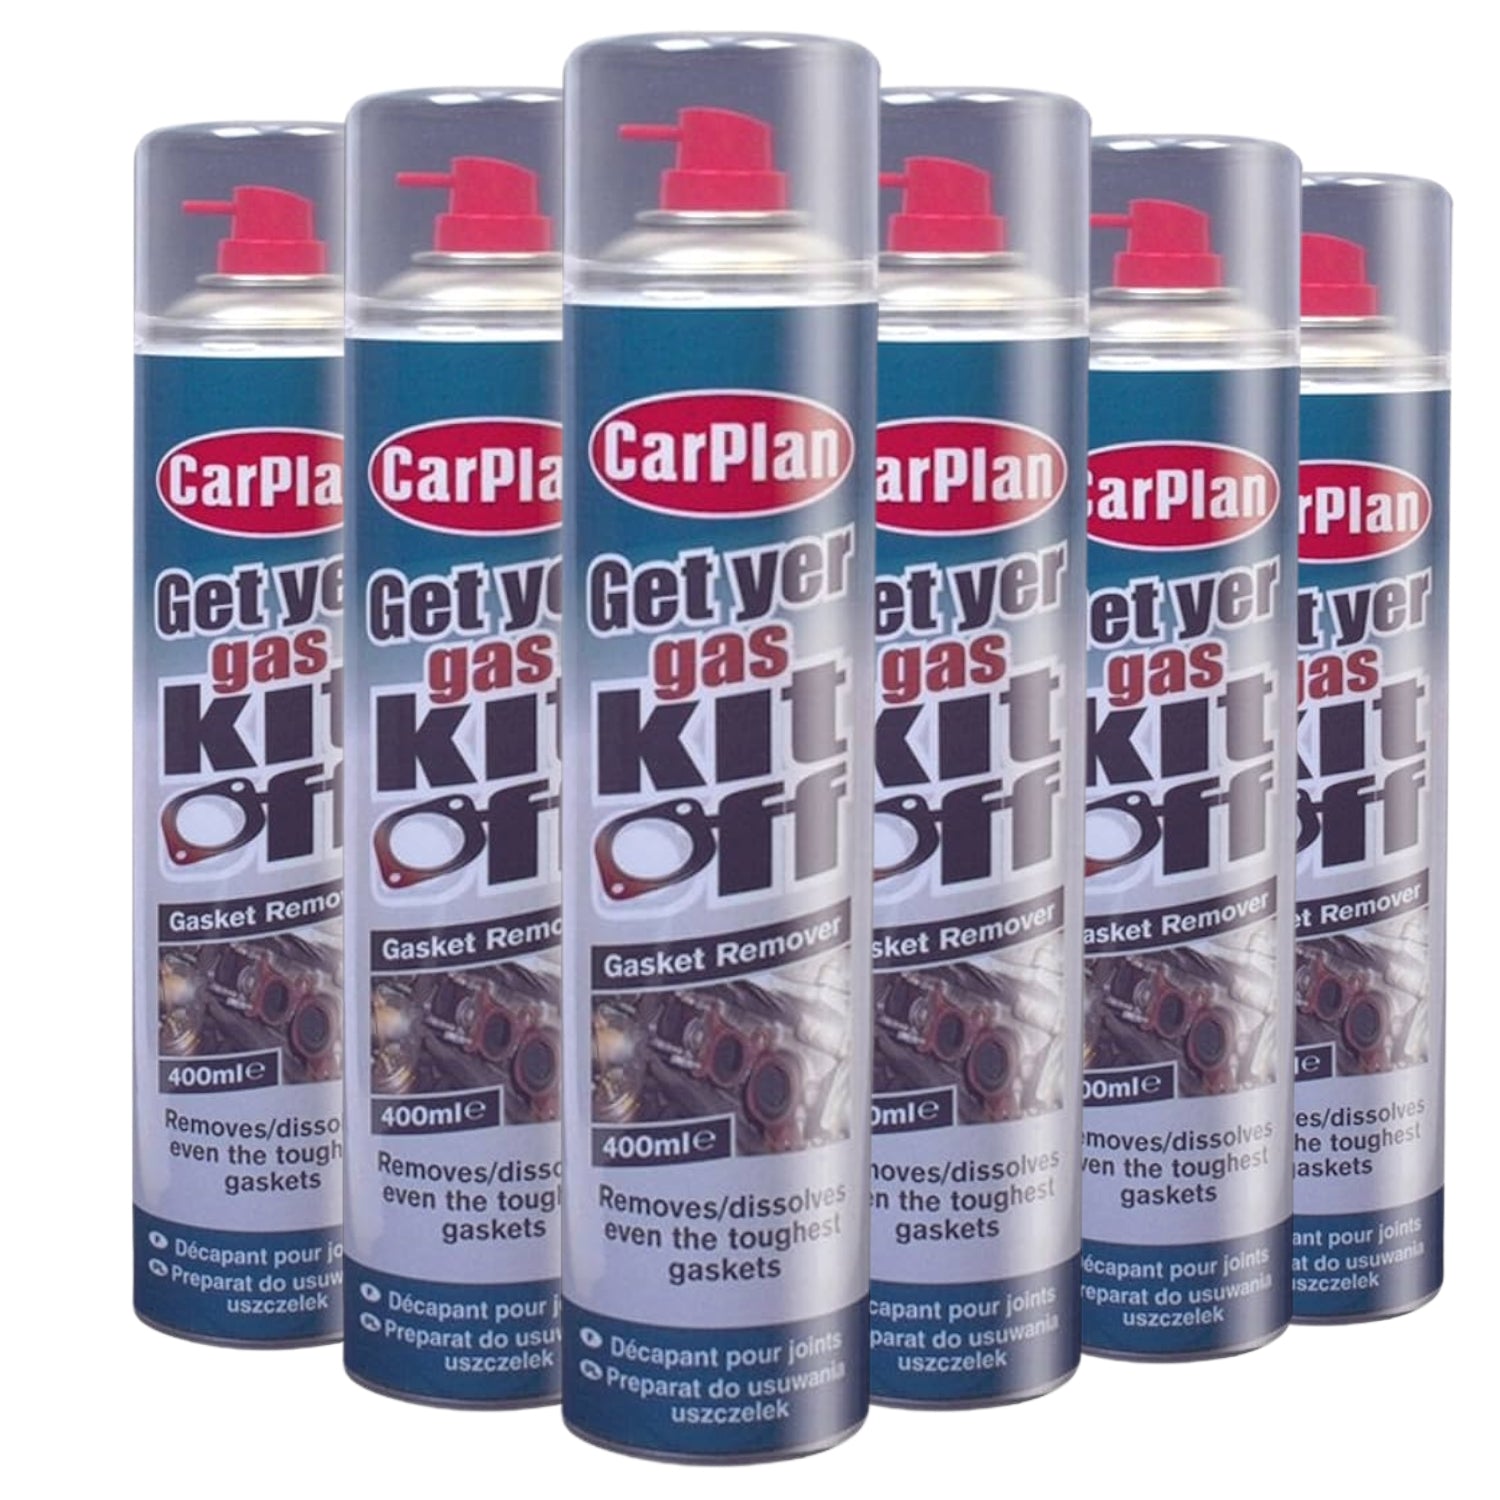 (6 cans) CarPlan Get Yer Gas Kit Off Gasket Remover - South East Clearance Centre